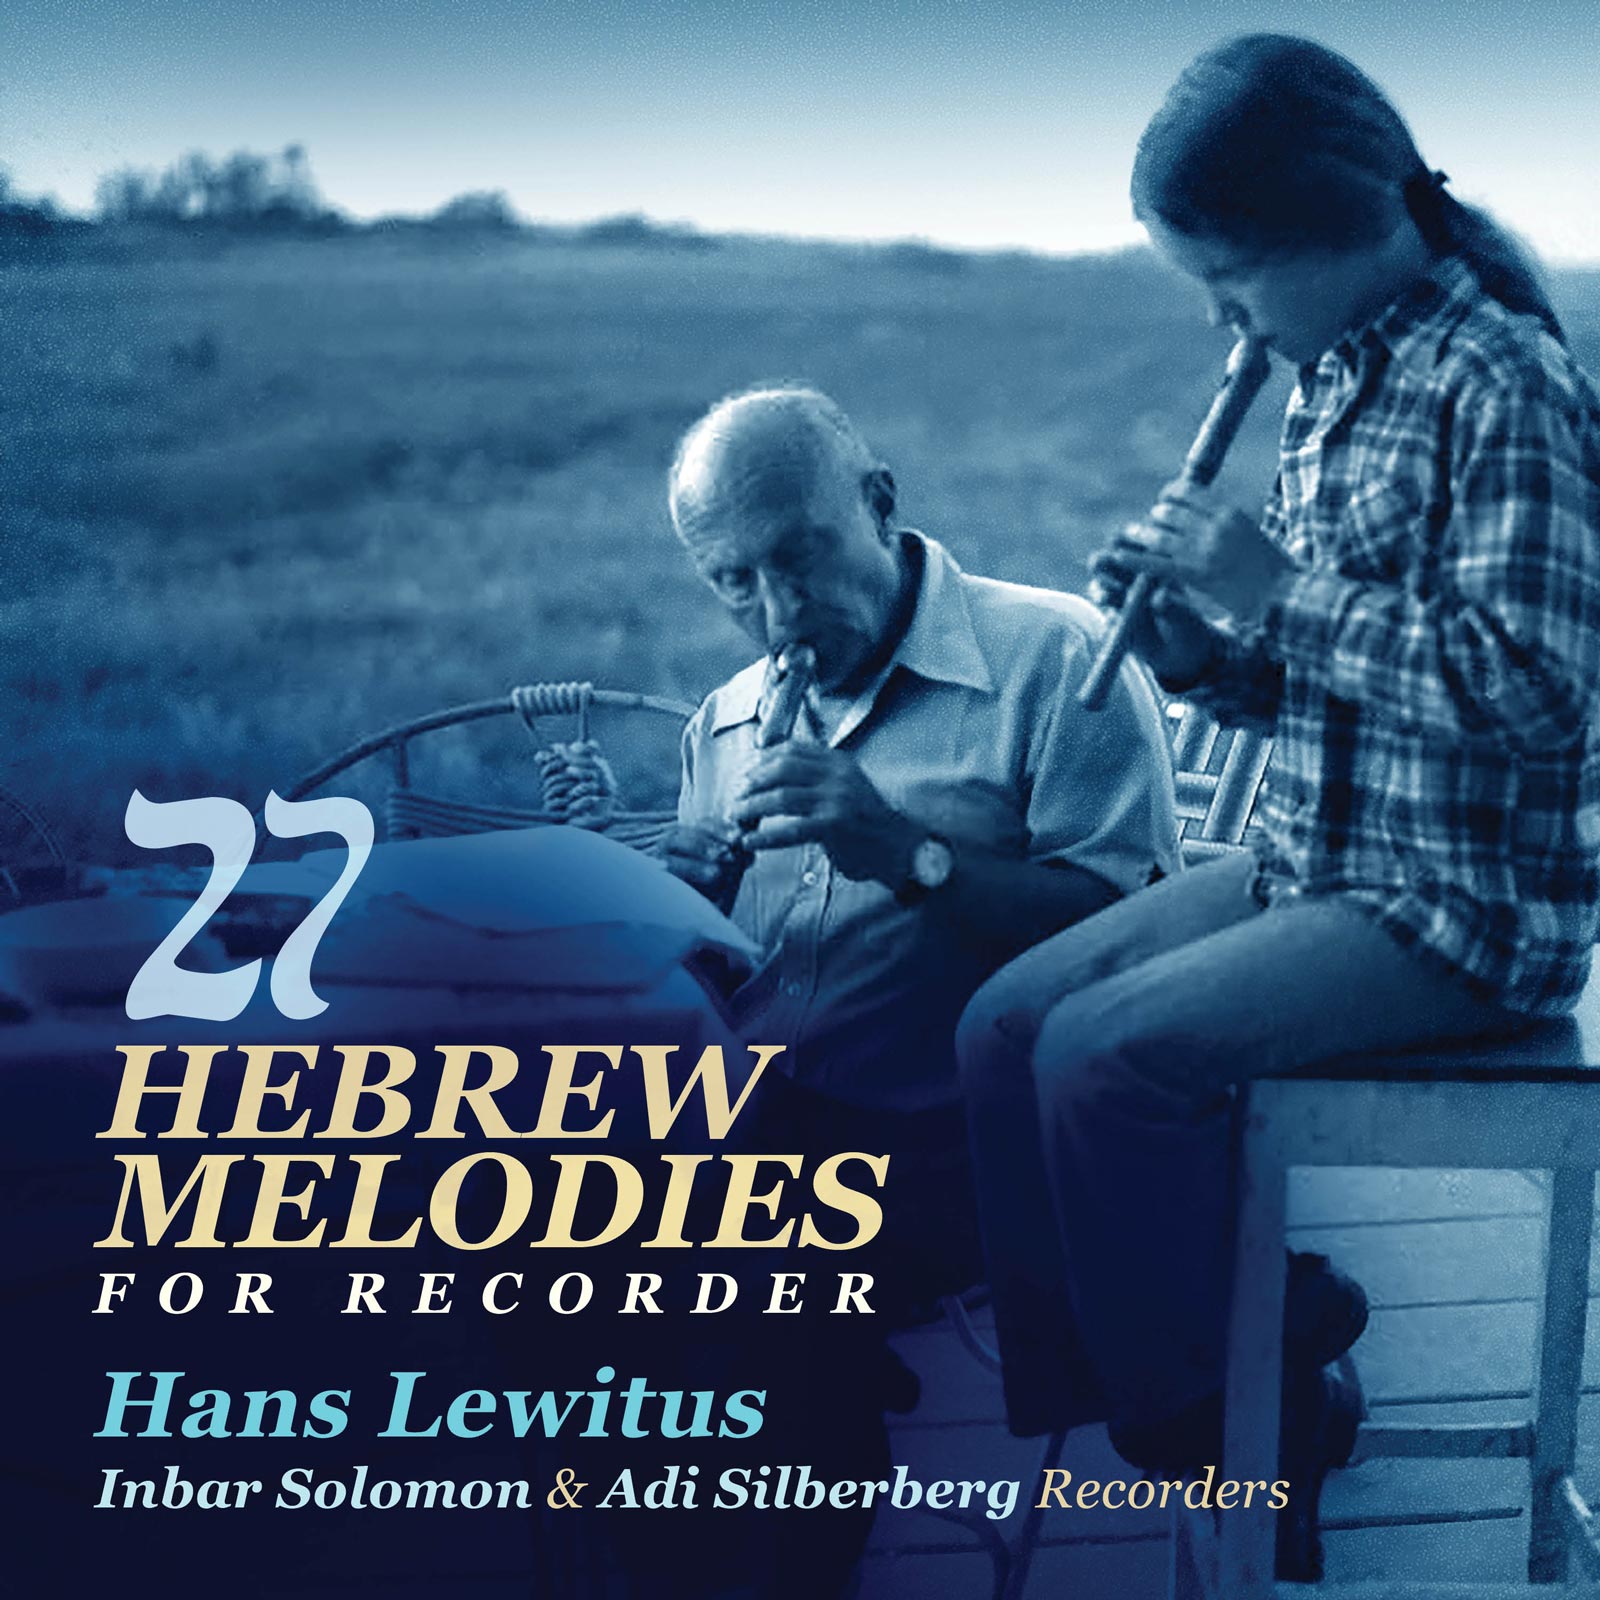 27 HEBREW MELODIES FOR RECORDER